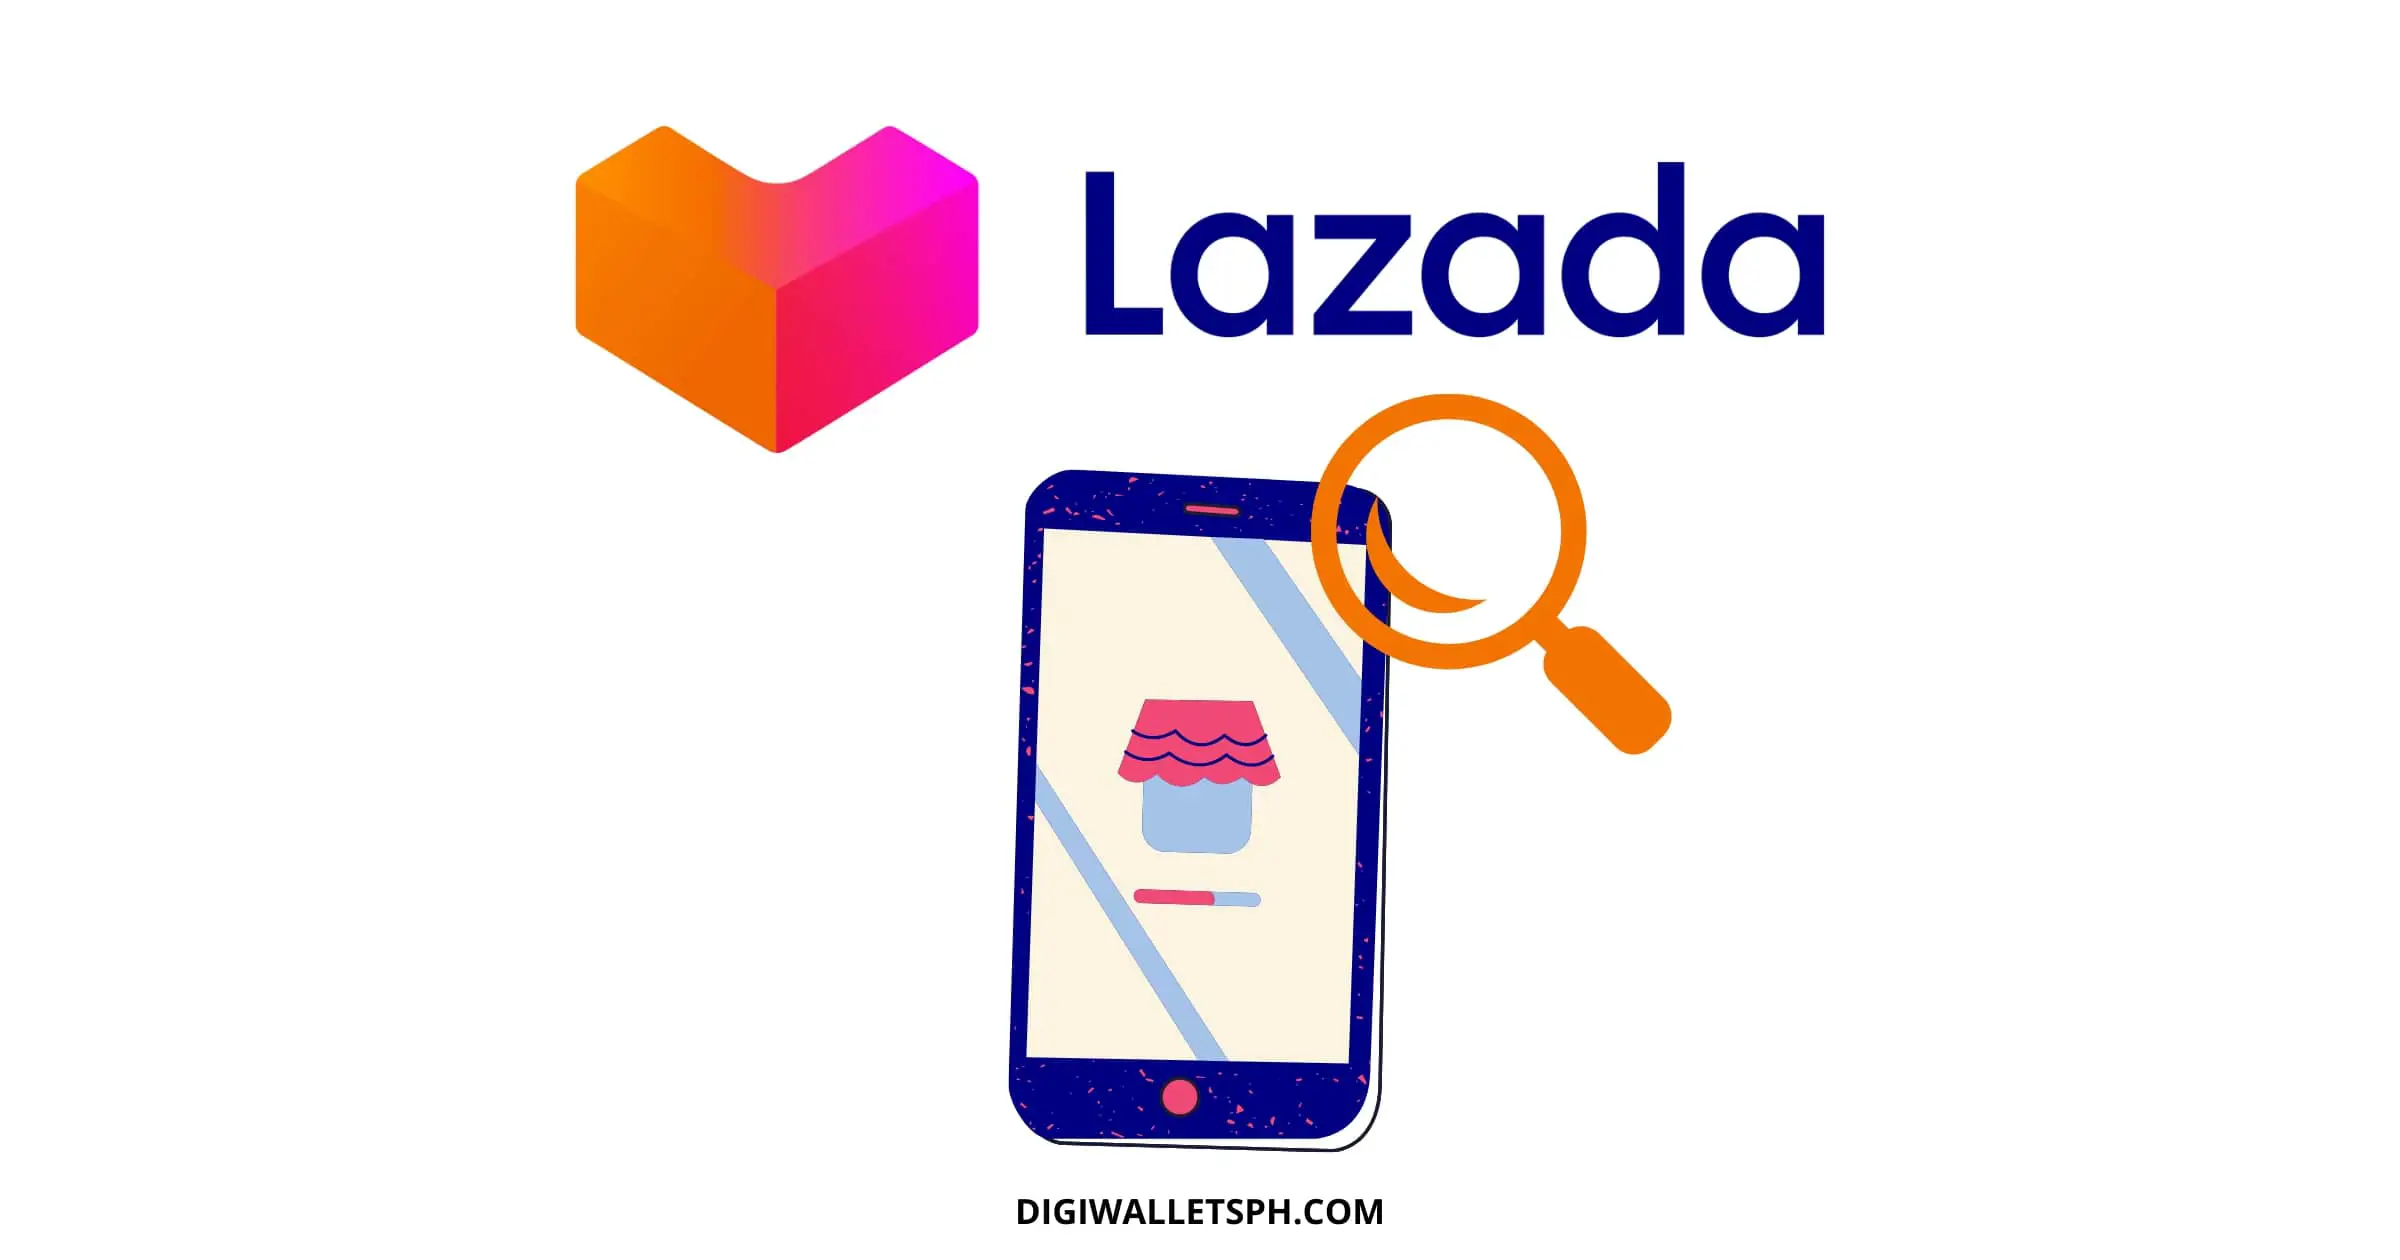 How to search stores in Lazada